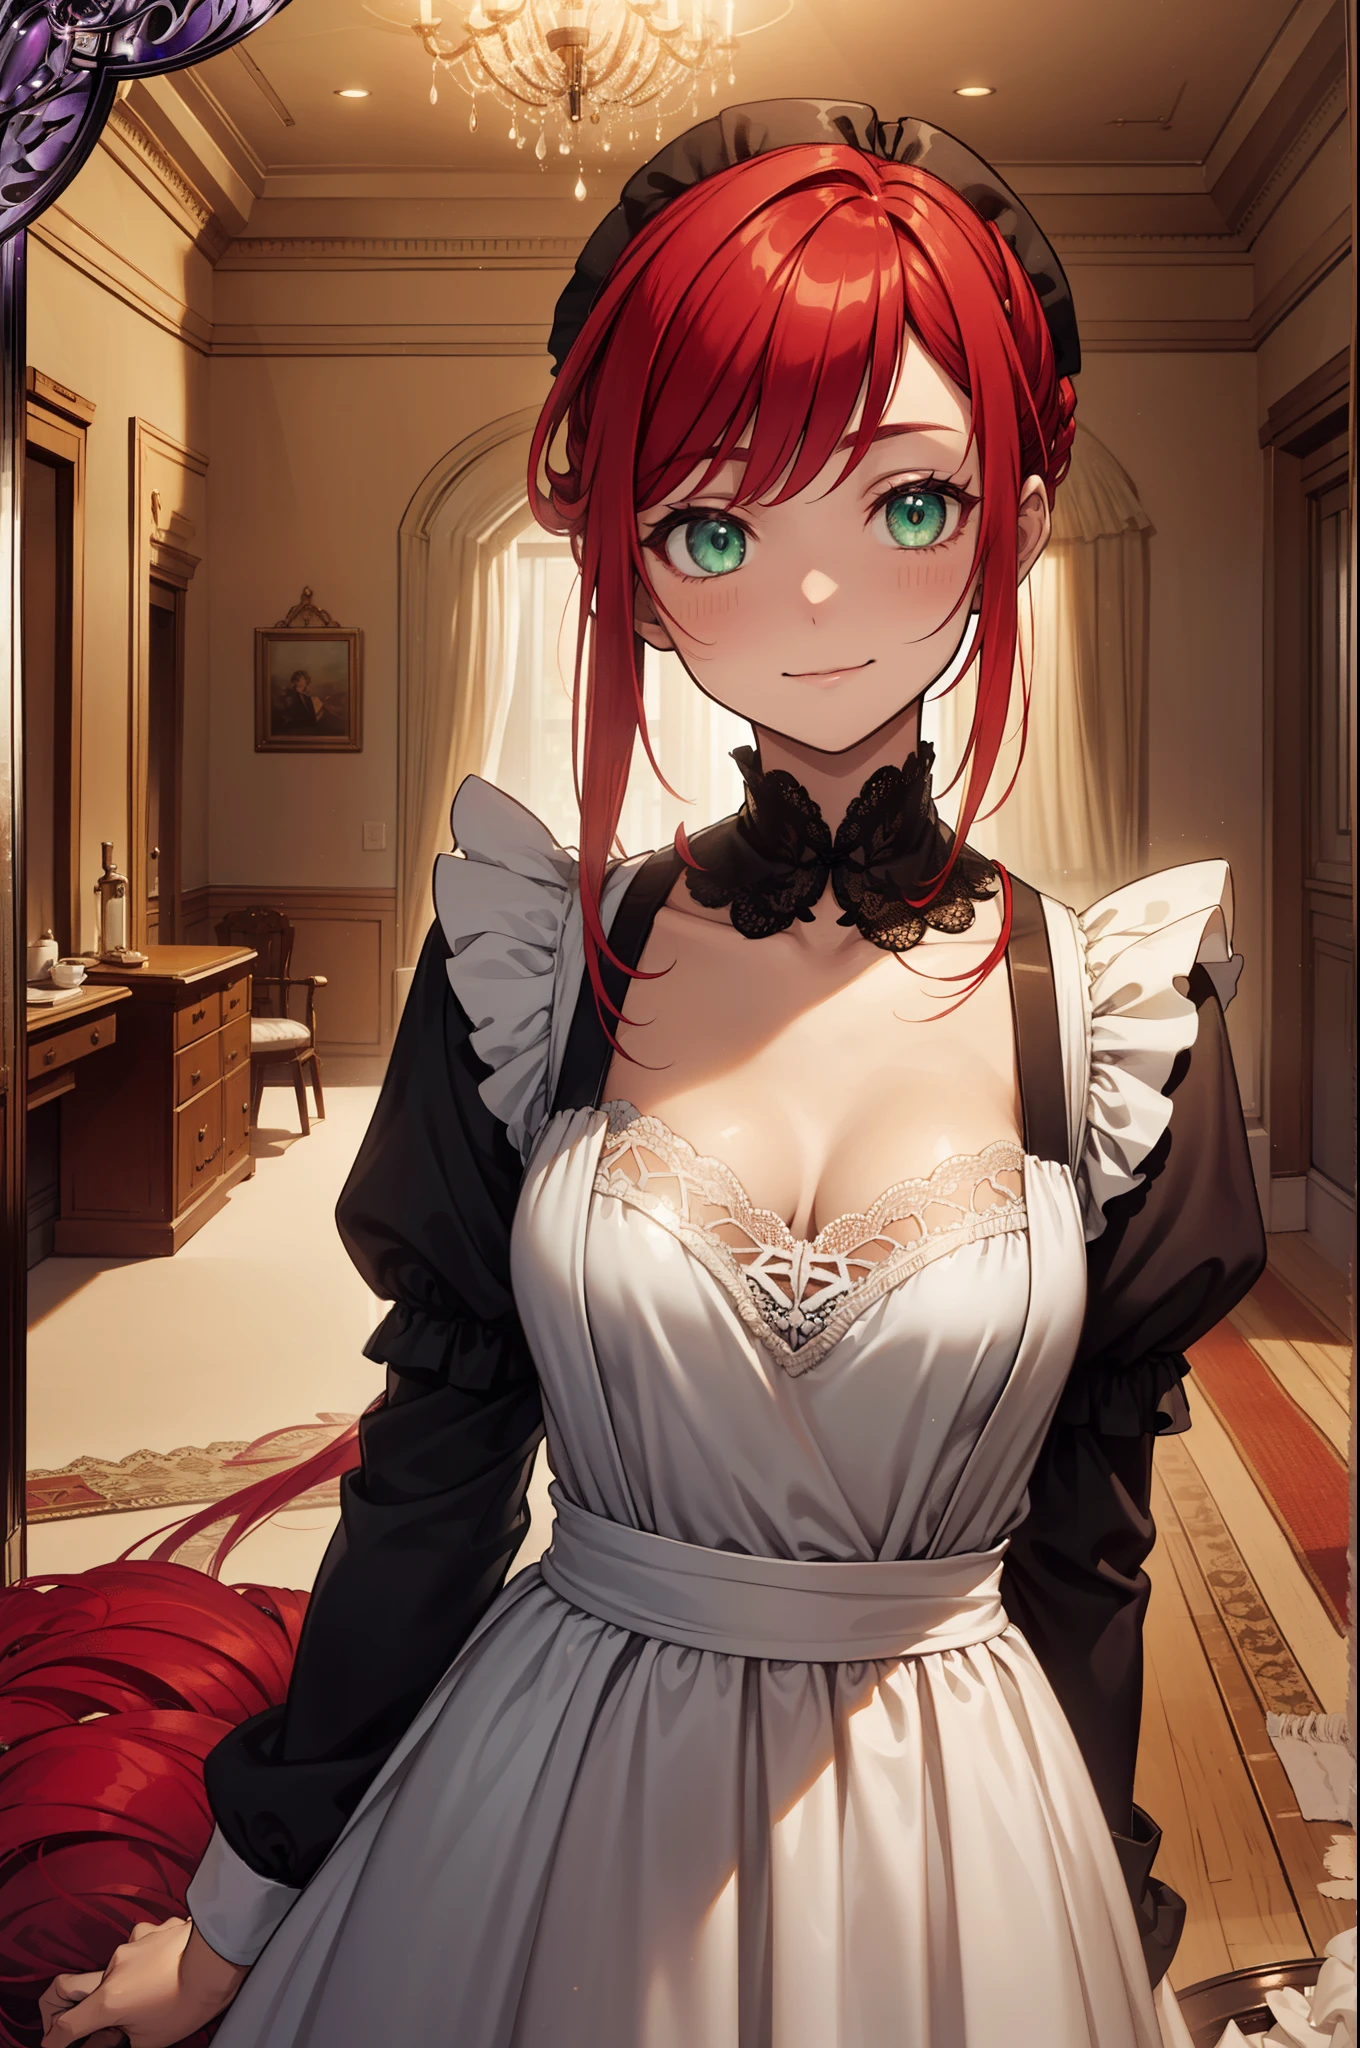 (Best quality, A high resolution, Textured skin, High quality, High details, High details,Extremely detailed CG unity), Enchanted，having fun，Being in love，housekeeper in fantasy world, crimson red hair, green eyes, exquisite costumes，solo person，long elegant dress, A small amount of lace，Dazzle, woman, beautiful, (maid), (house keeper), (in grand home), (luxurious house), house keeper female, more details, detailed home scene, home detailed, cleaning, maid cleaning